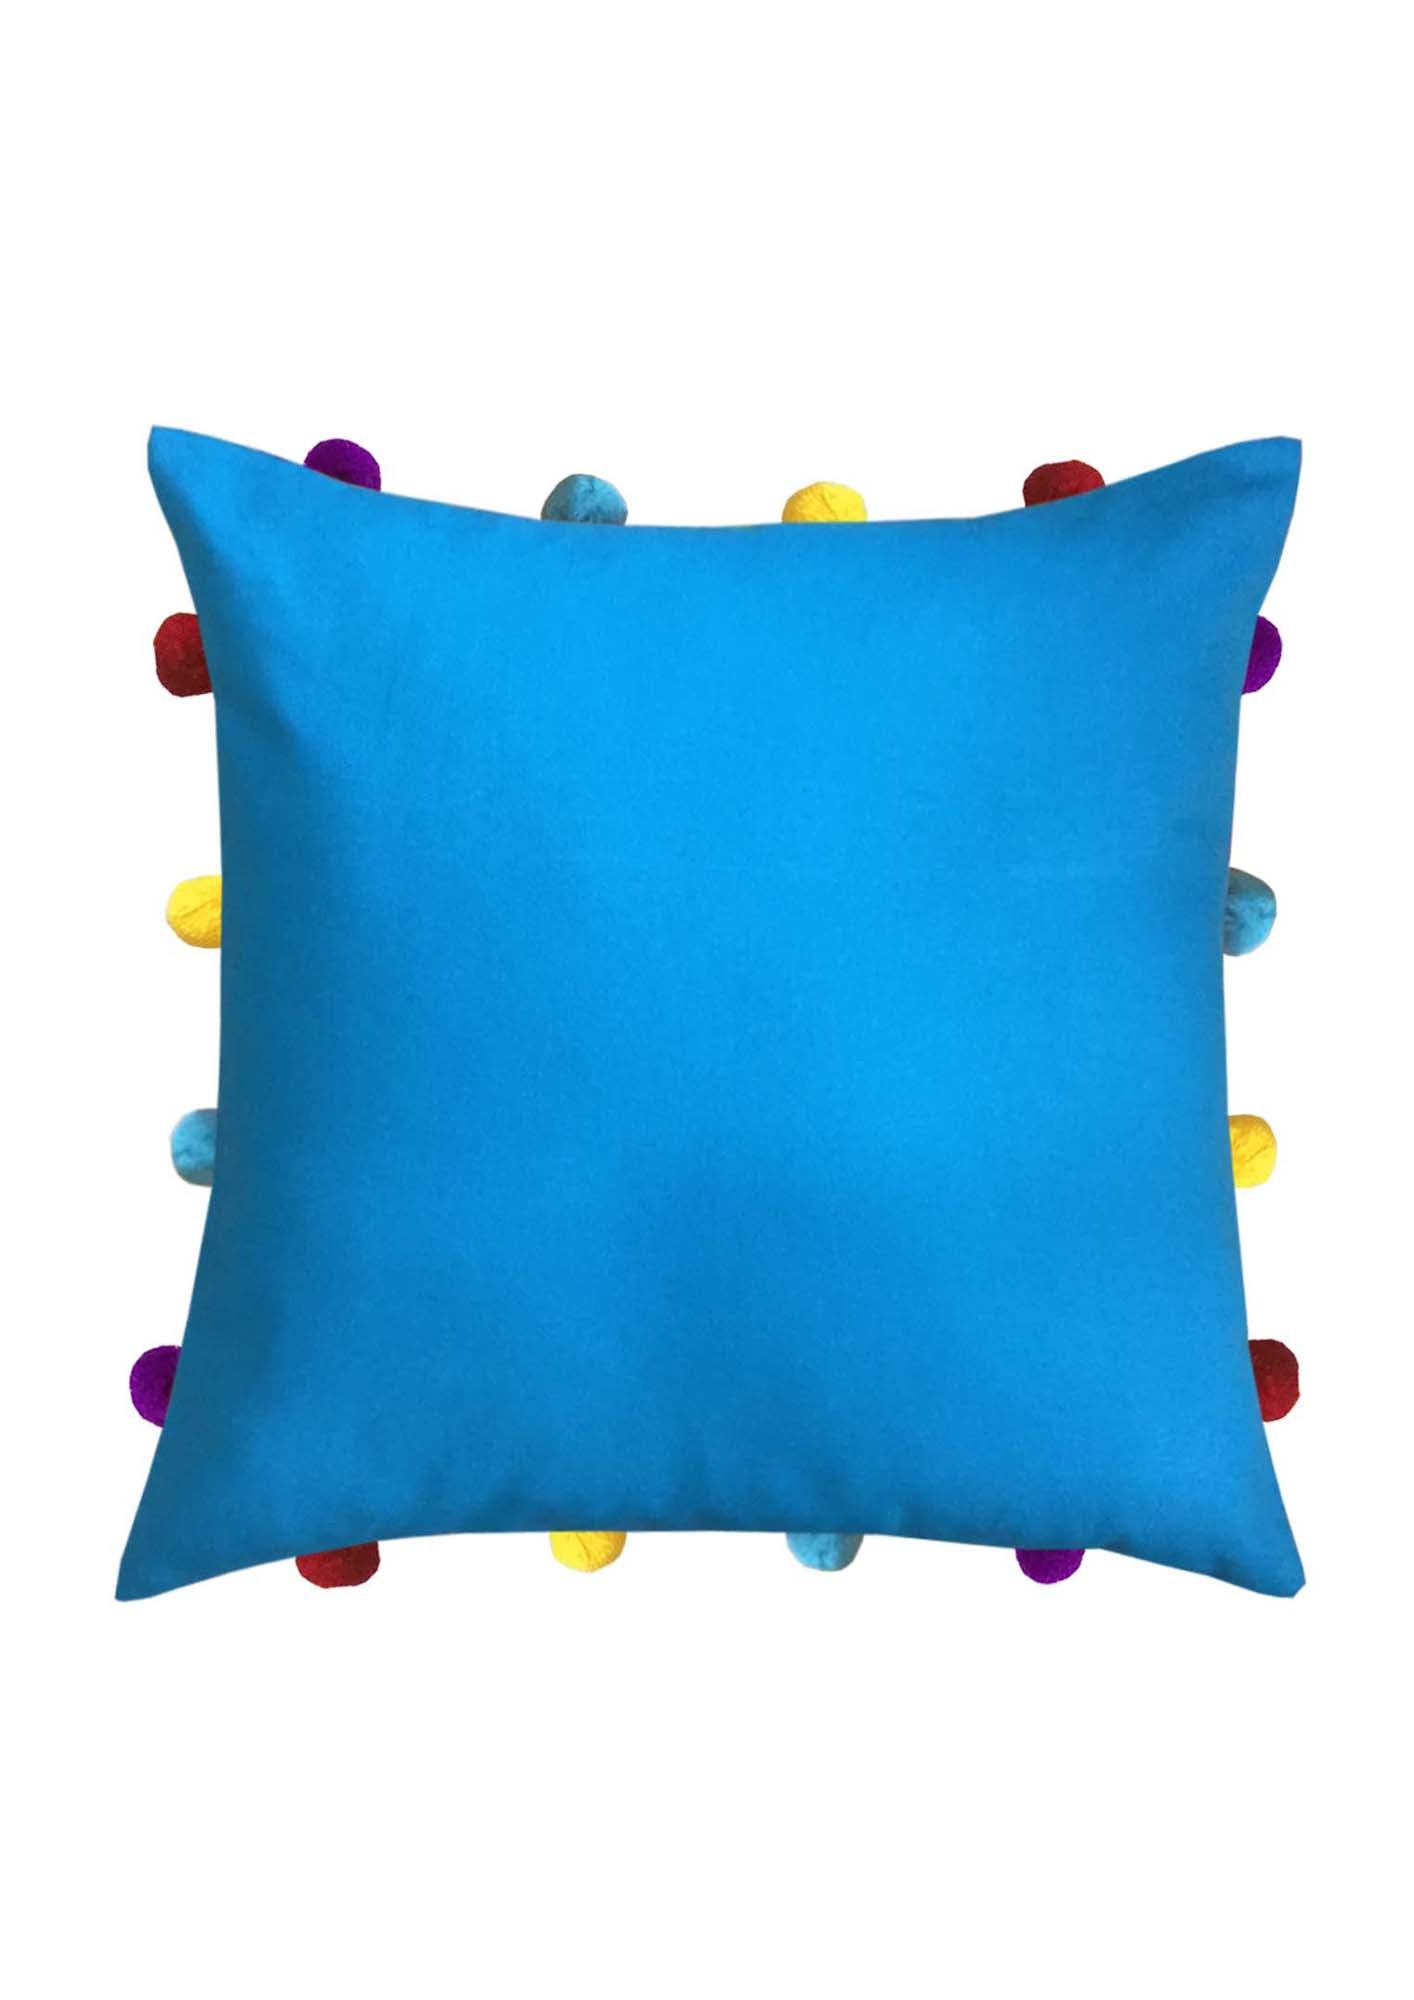 Lushomes Blue Sofa Cushion Cover Online with Colorful Pom Pom (Pack of 1 pc, 14 x 14 inches)